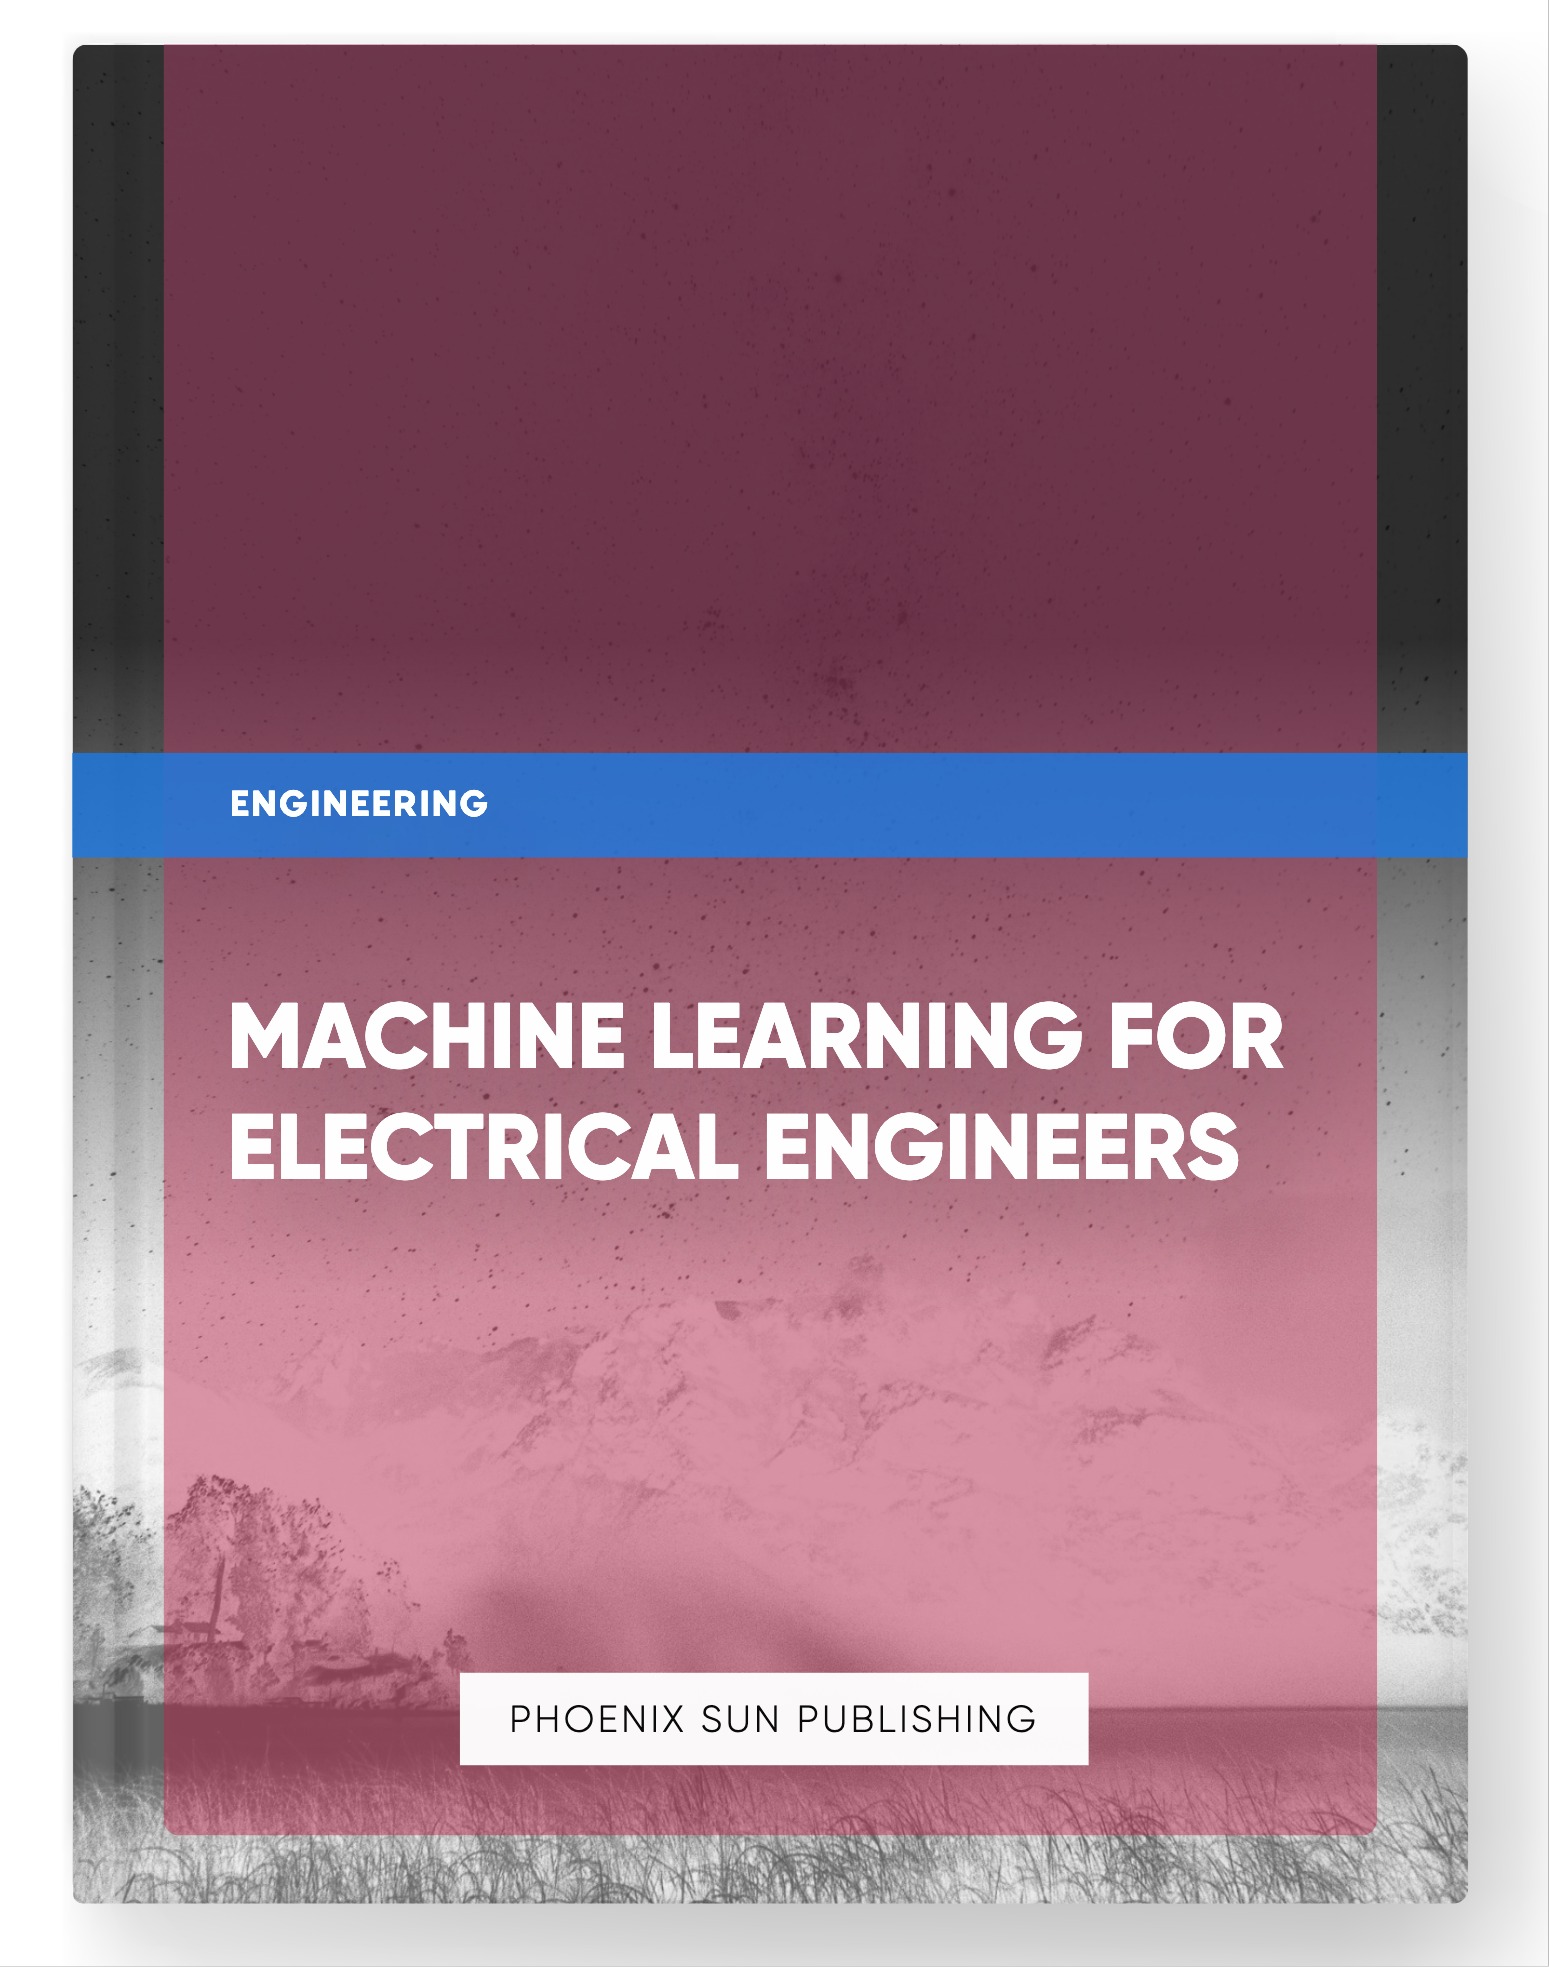 Machine Learning for Electrical Engineers